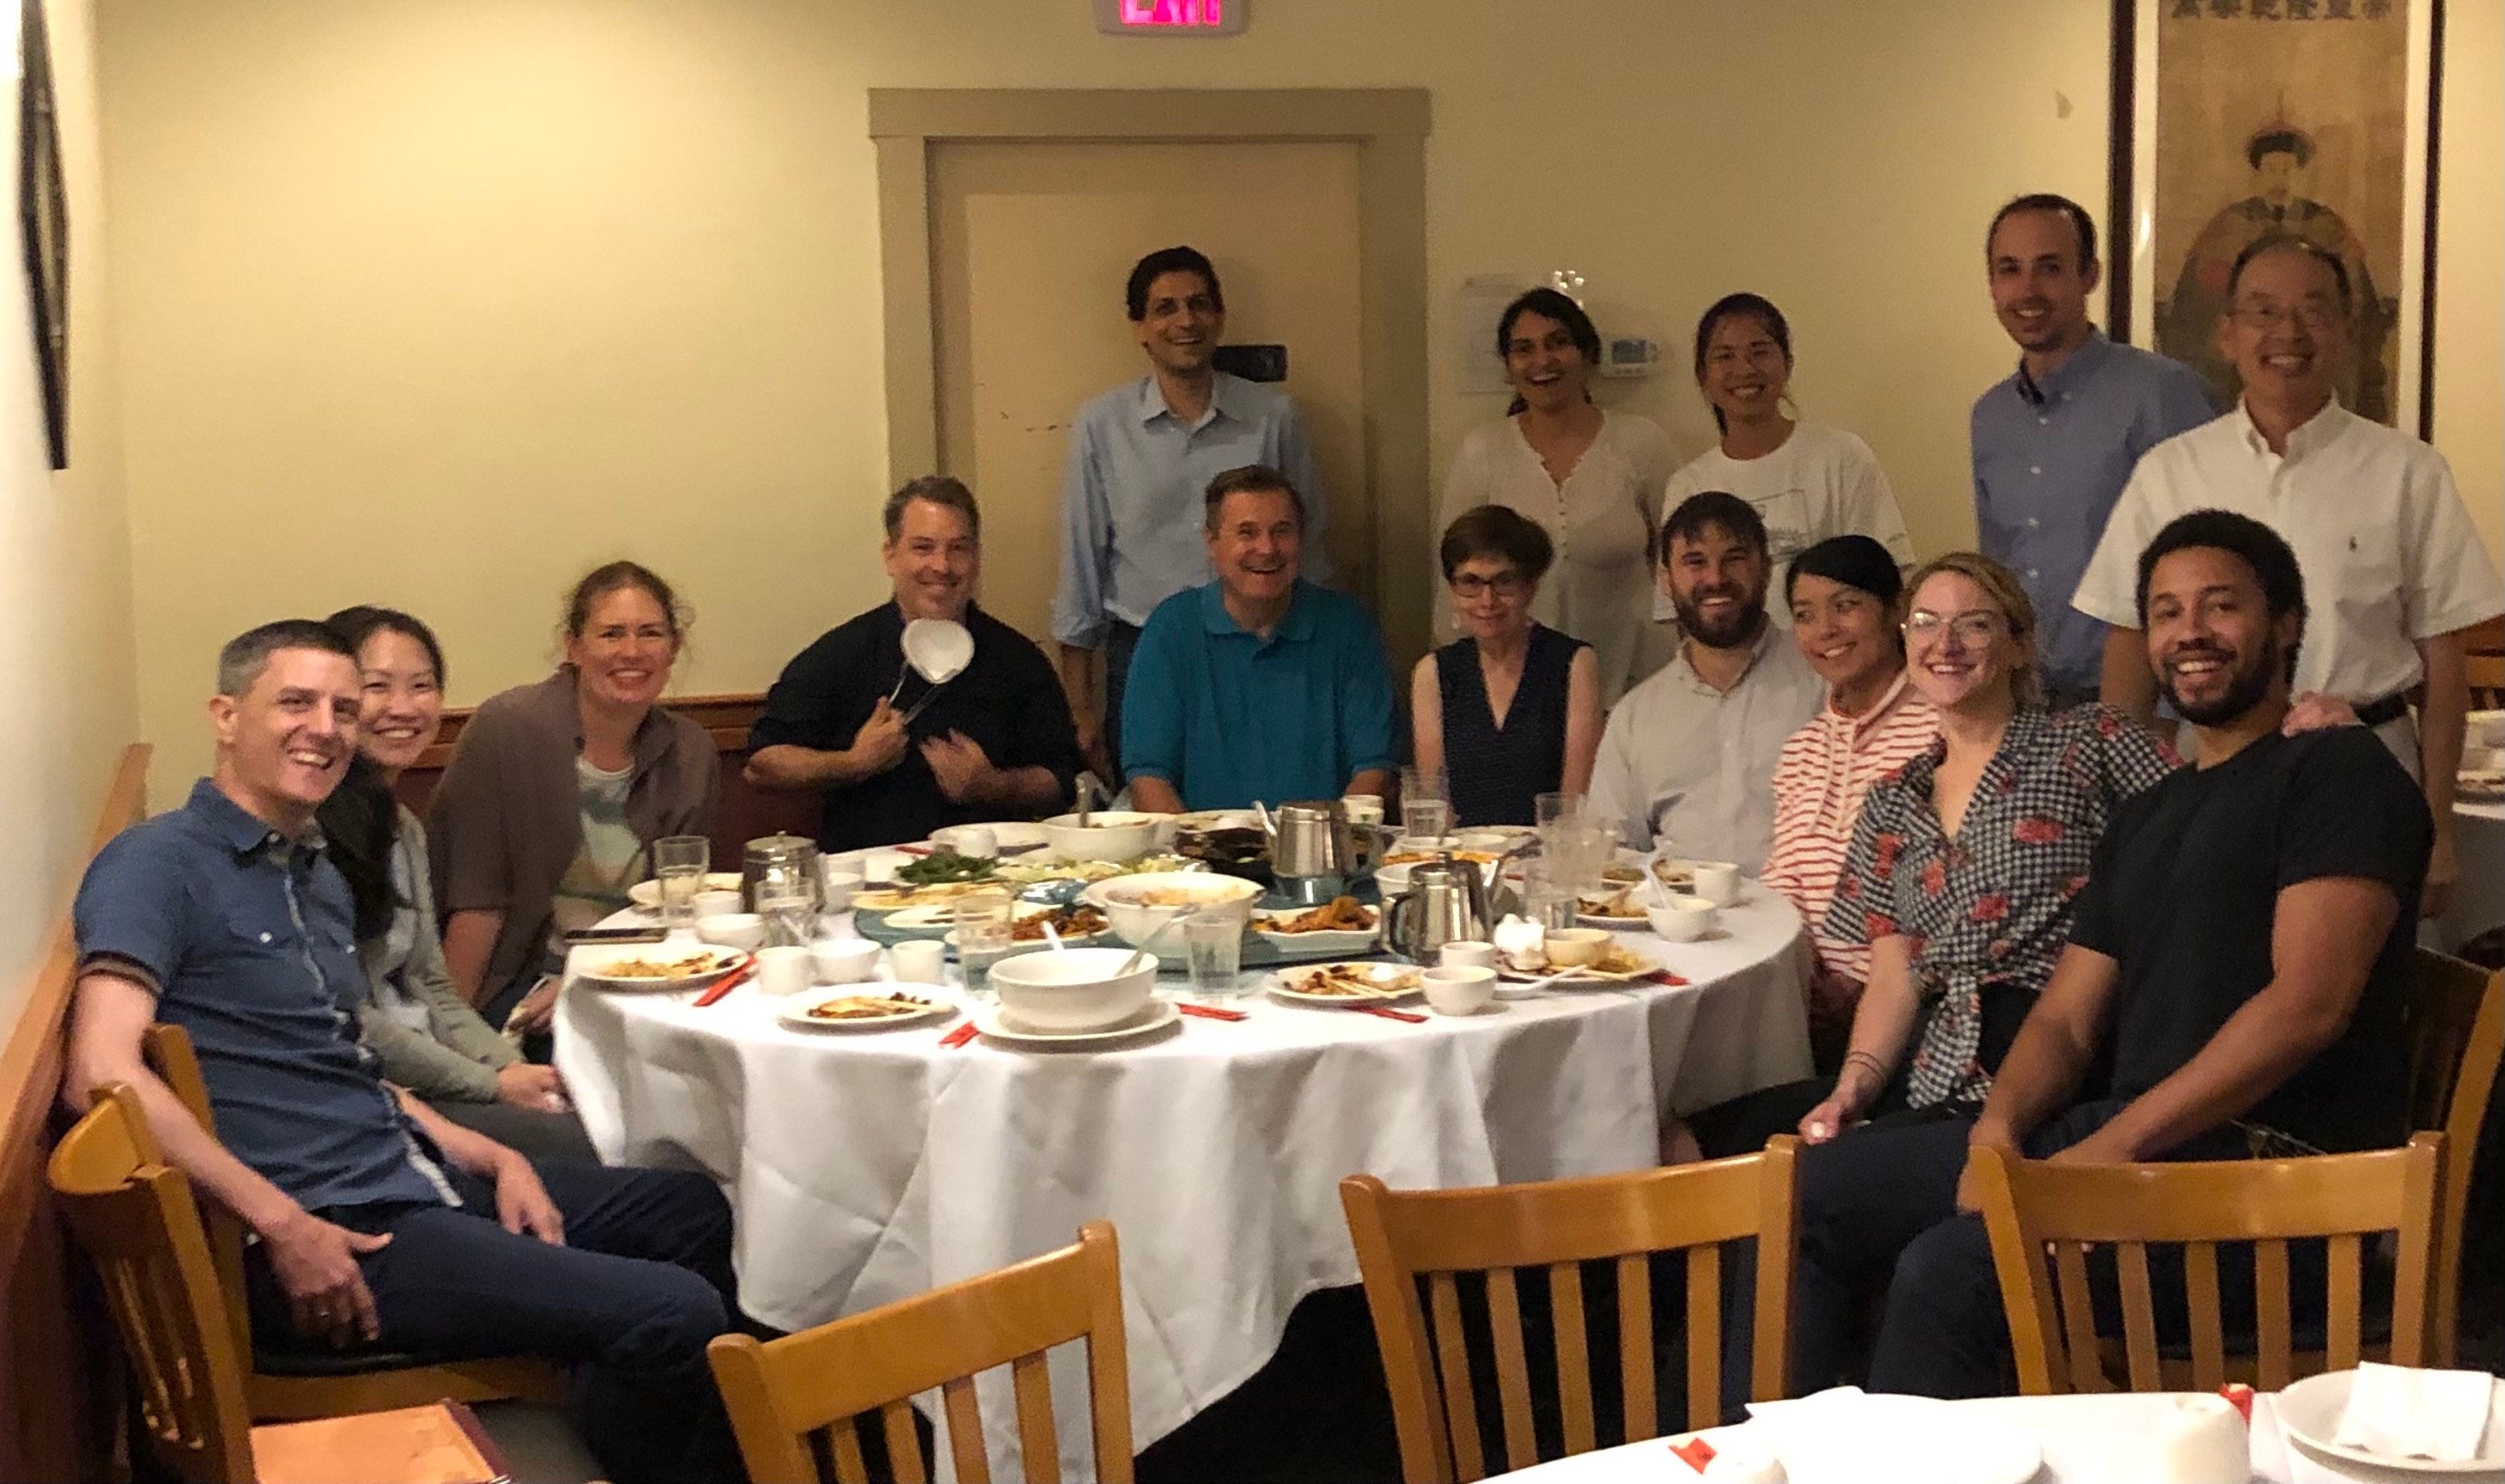 Postpandemic dinner in Boston with former group 2021